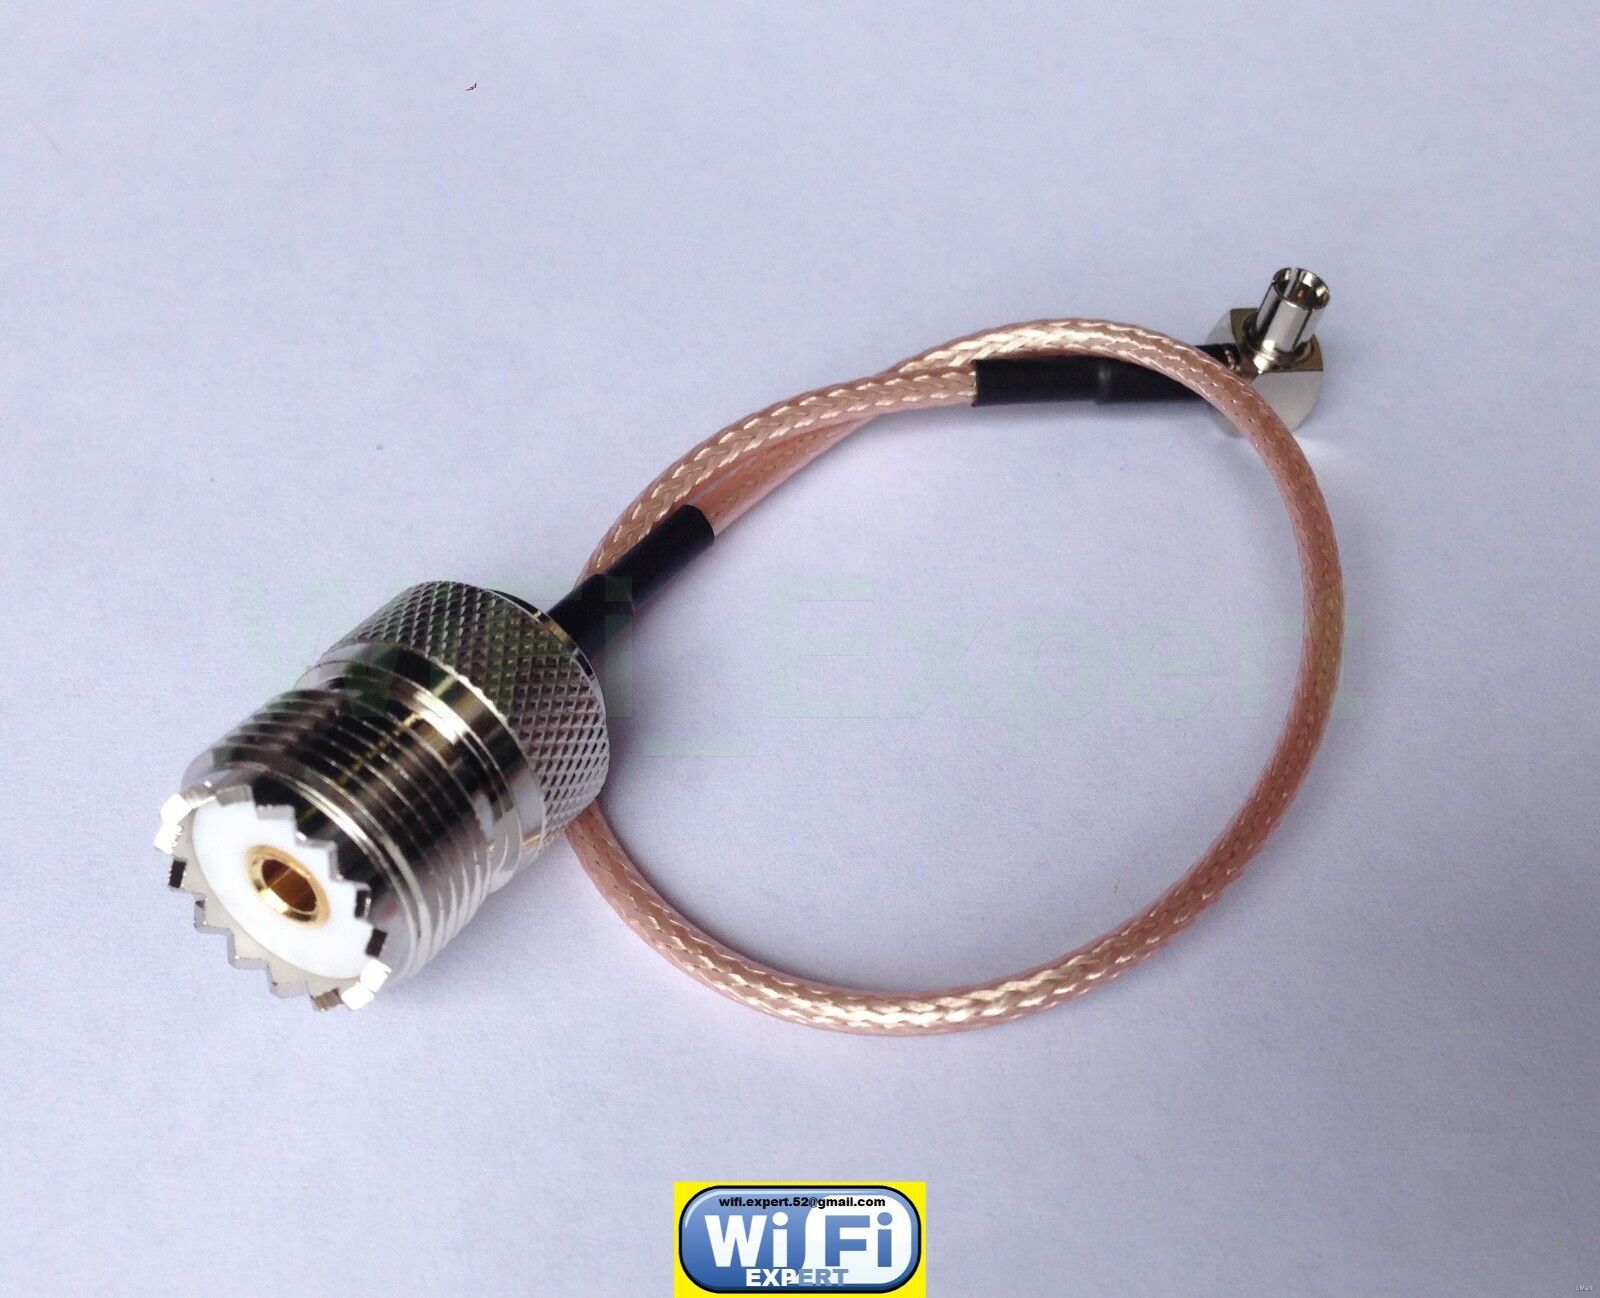 1 x UHF SO239 female jack to TS9 male ANGLE Pigtail Jumper RF Pigtail 4-20 INCH